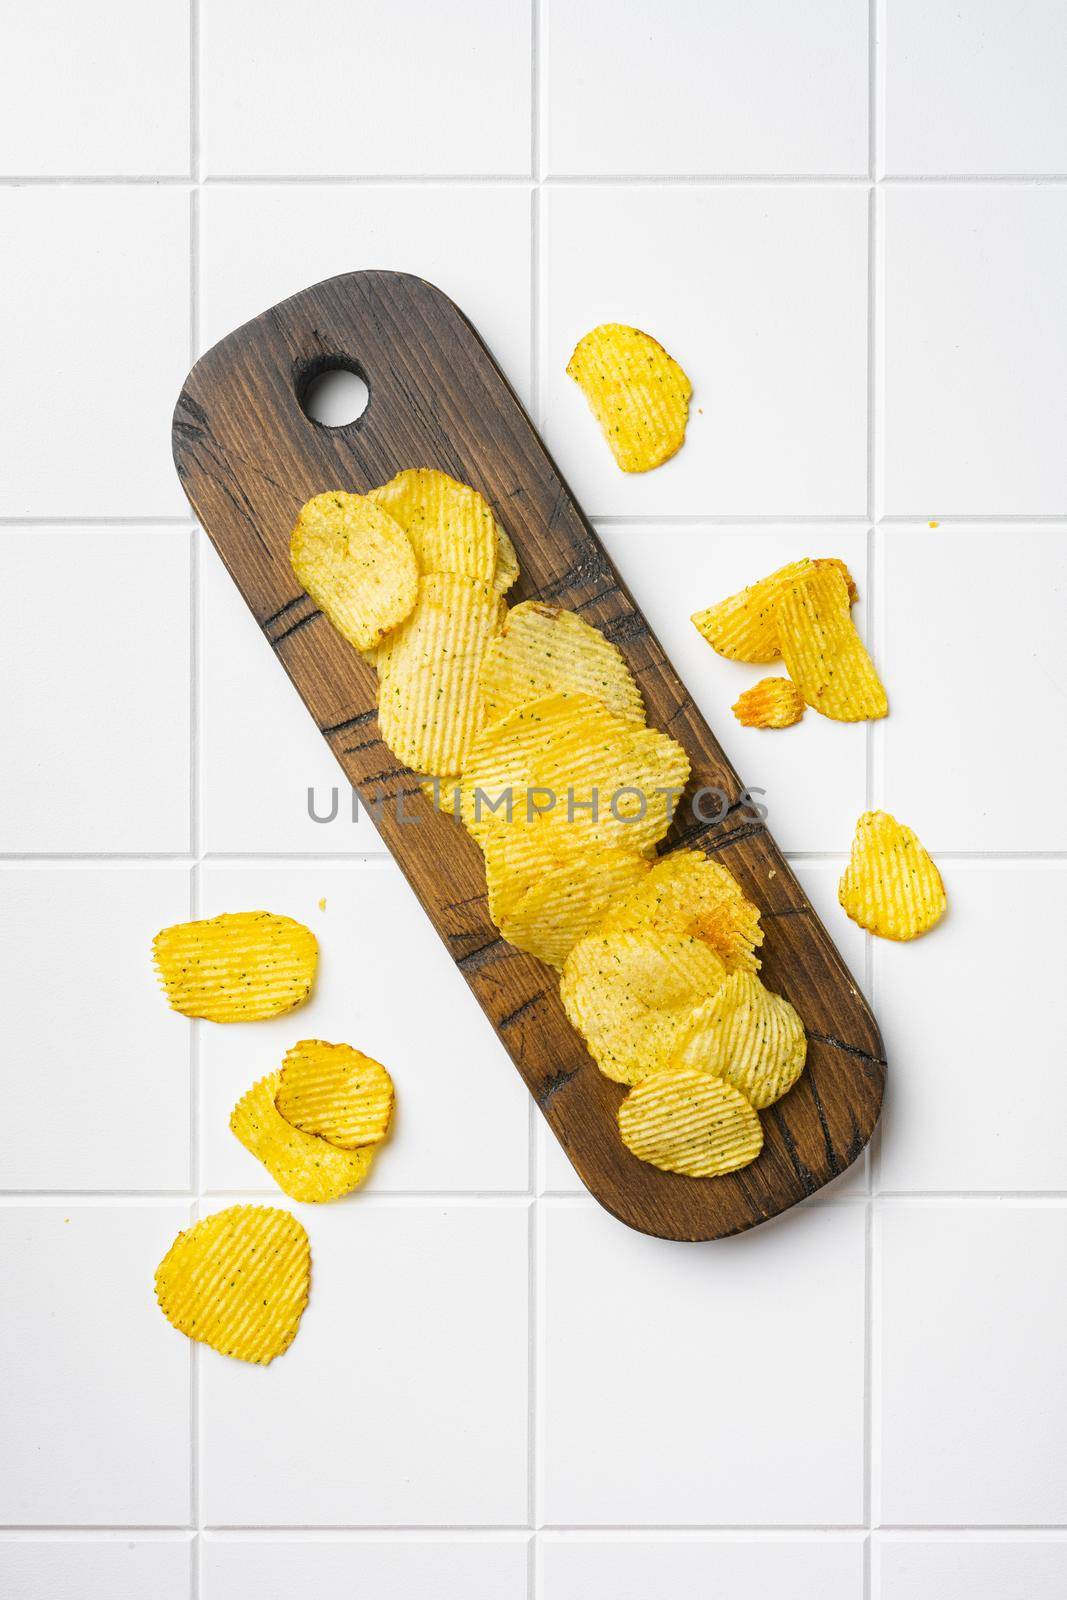 Wavy Potato Chips, on white ceramic squared tile table background, top view flat lay